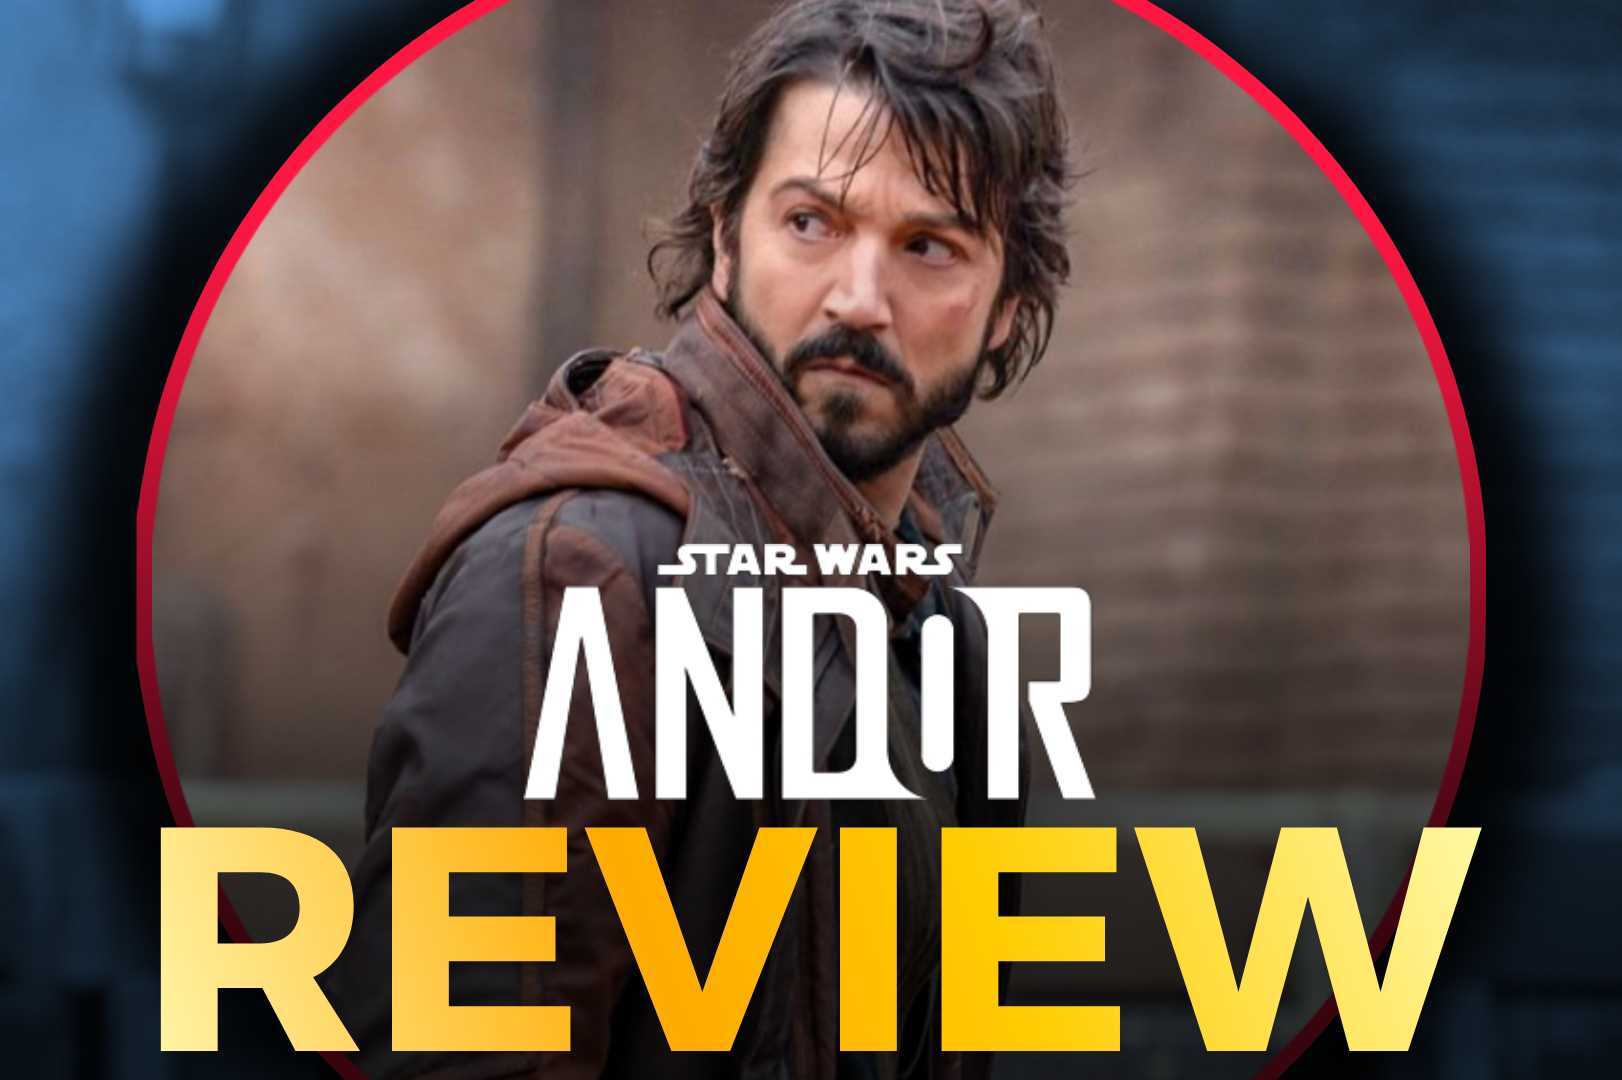 ‘Andor’ Season One Review: “A Spectacular Addition to Star Wars”